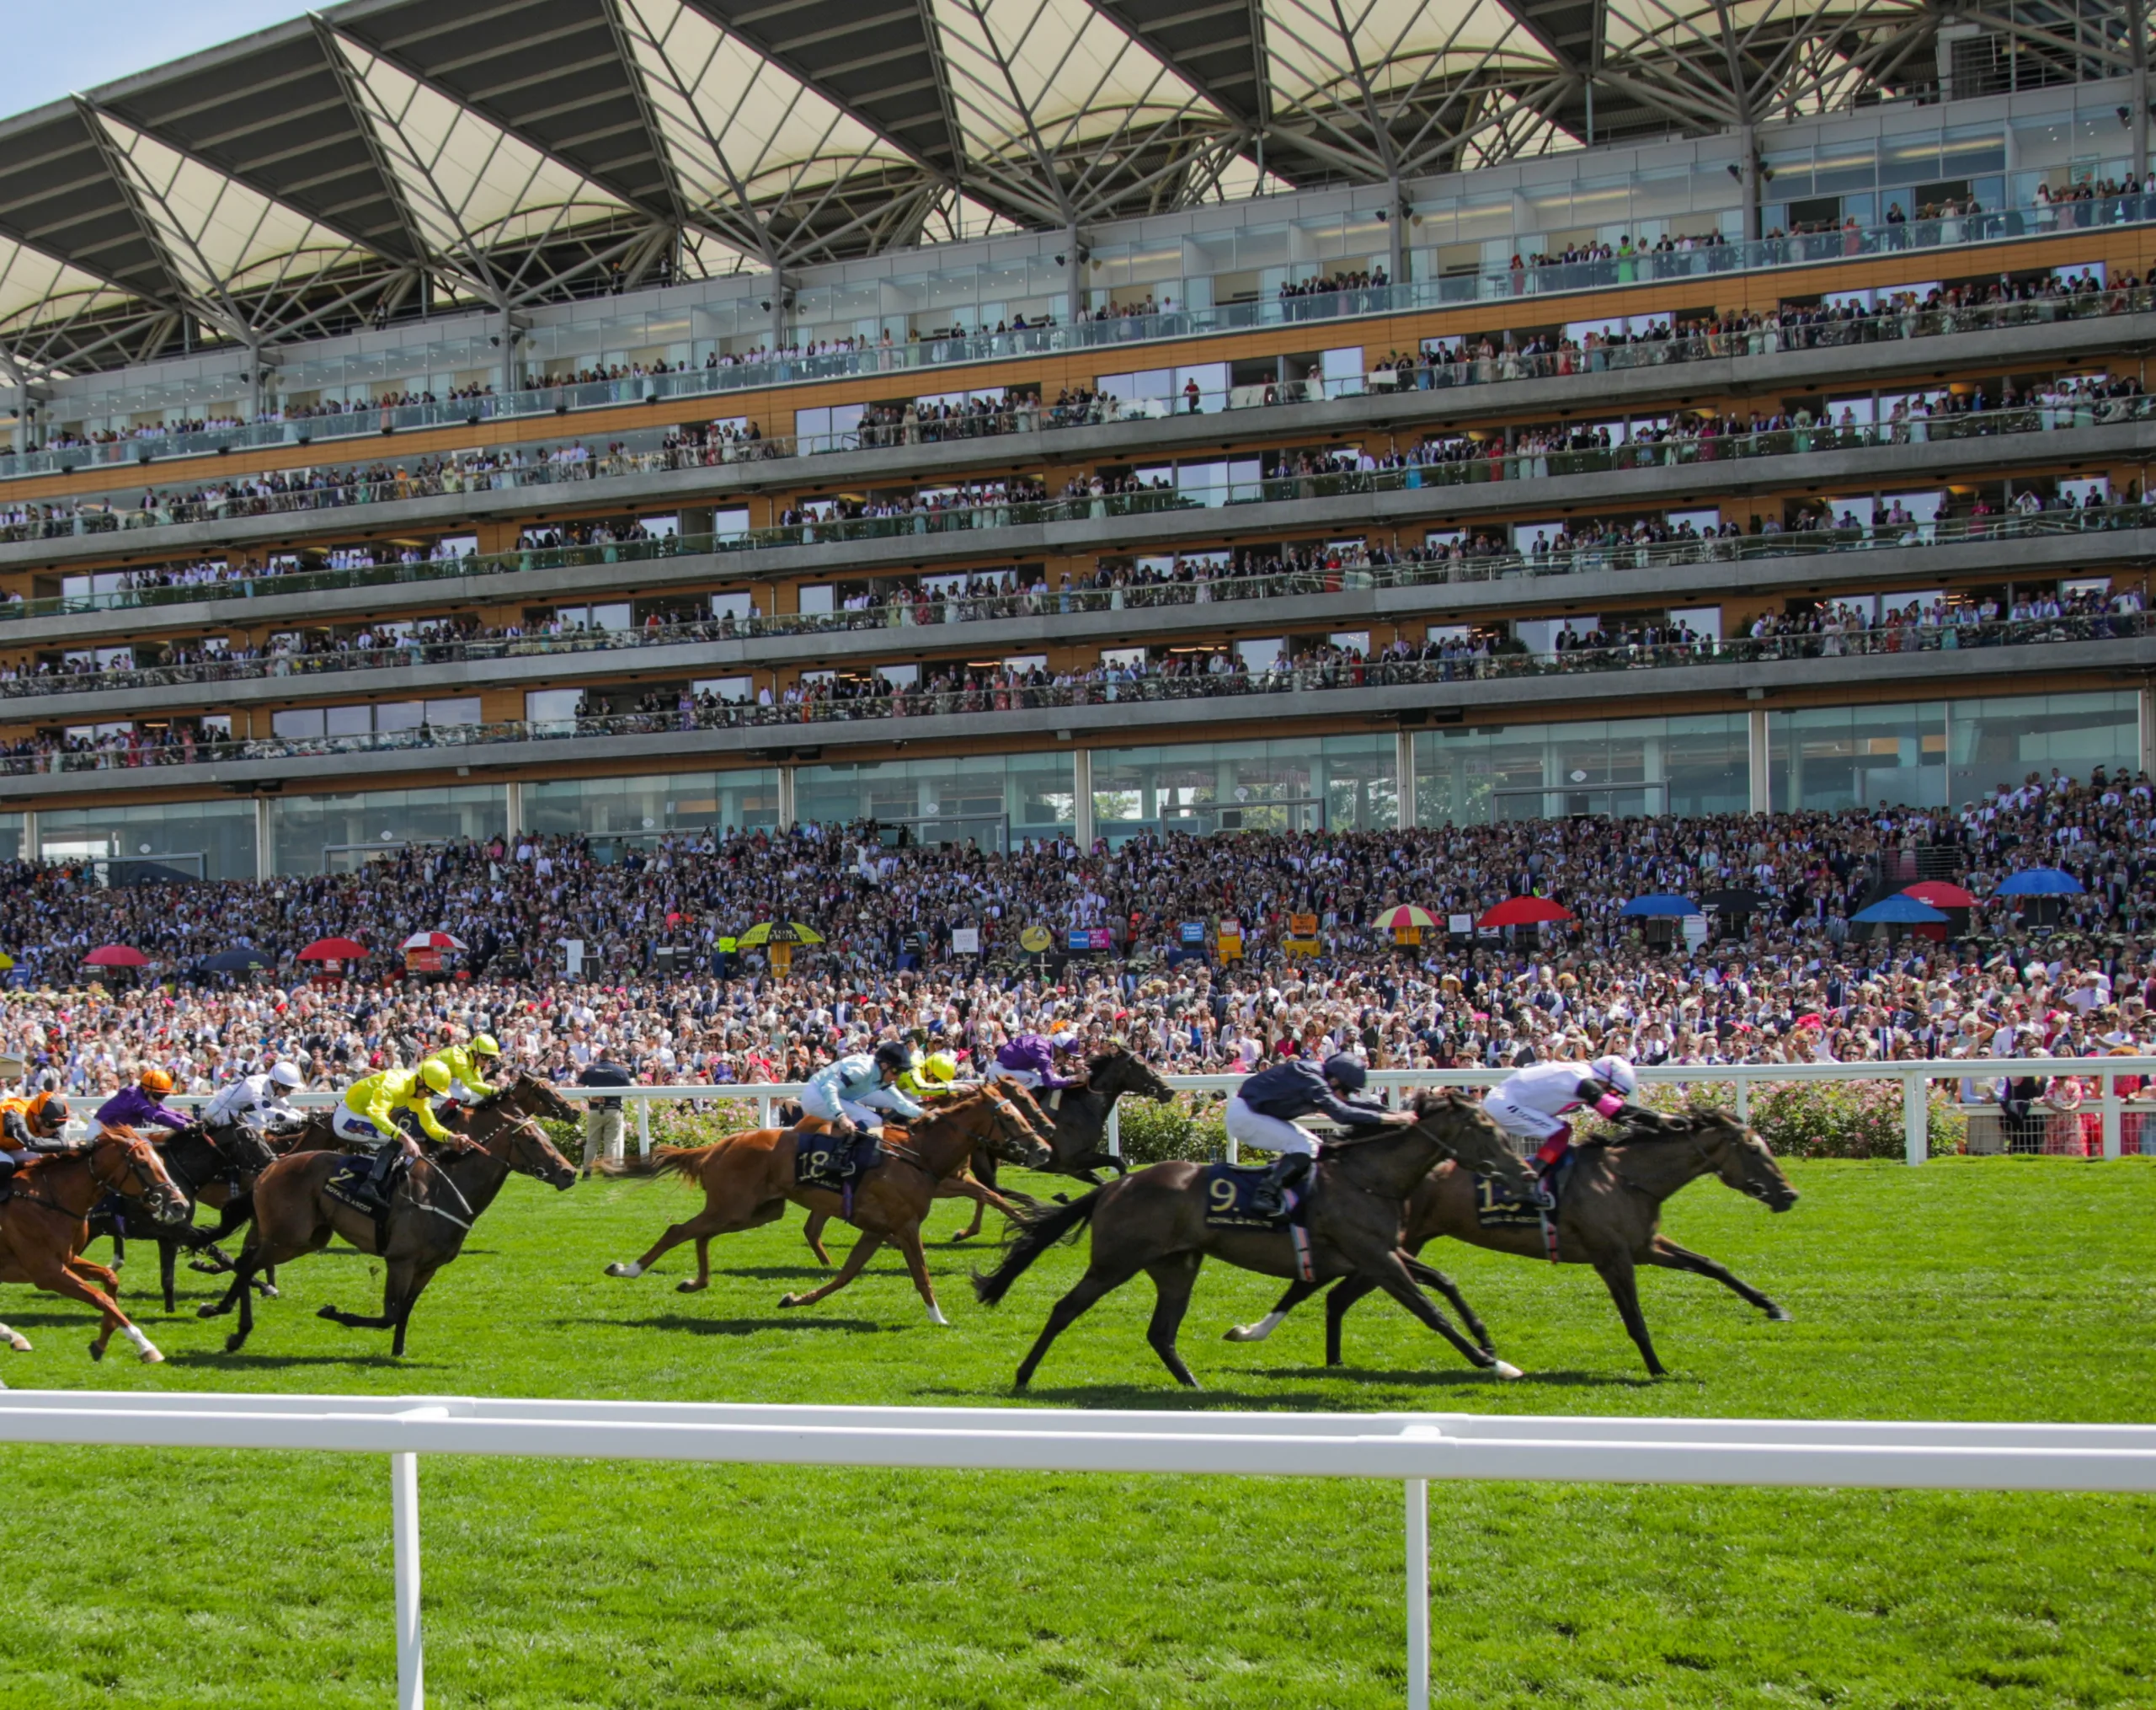 Things to do in Ascot